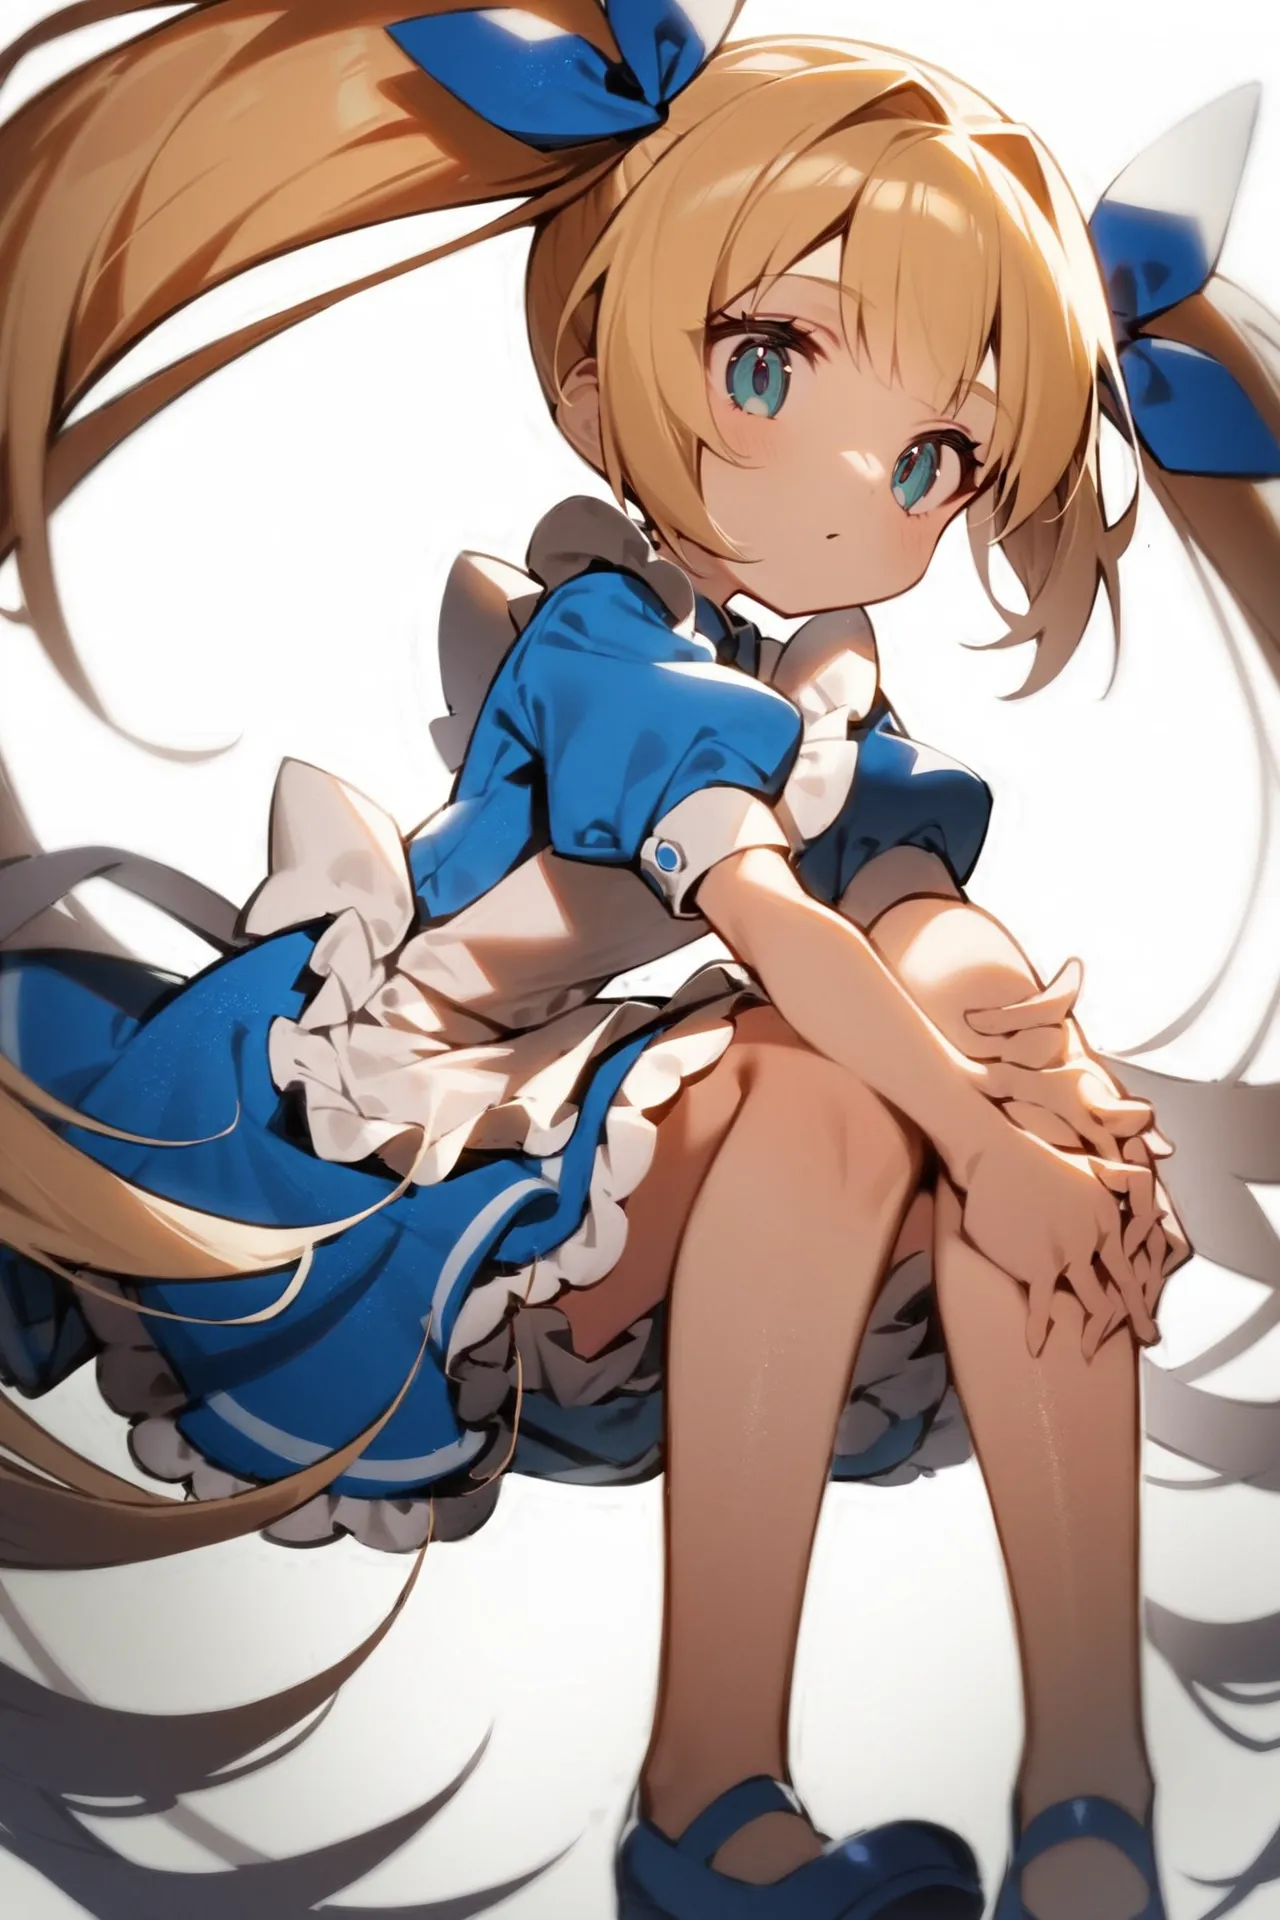 '1girl, hands on own knees,\nblonde hair, twintails, blue dress, white apron,\nwhite background,\nAlice in glitterworld\nNegative prompt: (worst quality, low quality:1.4), nsfw\nSteps: 35, Sampler: DPM++ 2M SDE Karras, CFG scale: 7, Seed: 1, Size: 640x960, Model hash: 642b08ca49, Model: ConfusionXL2.0_fp16_vae, VAE hash: 63aeecb90f, VAE: sdxl_vae_0.9.safetensors, Denoising strength: 0.6, Clip skip: 2, Hires upscale: 2, Hires steps: 15, Hires upscaler: ESRGAN_4x, Eta: 0.68, Version: v1.7.0'